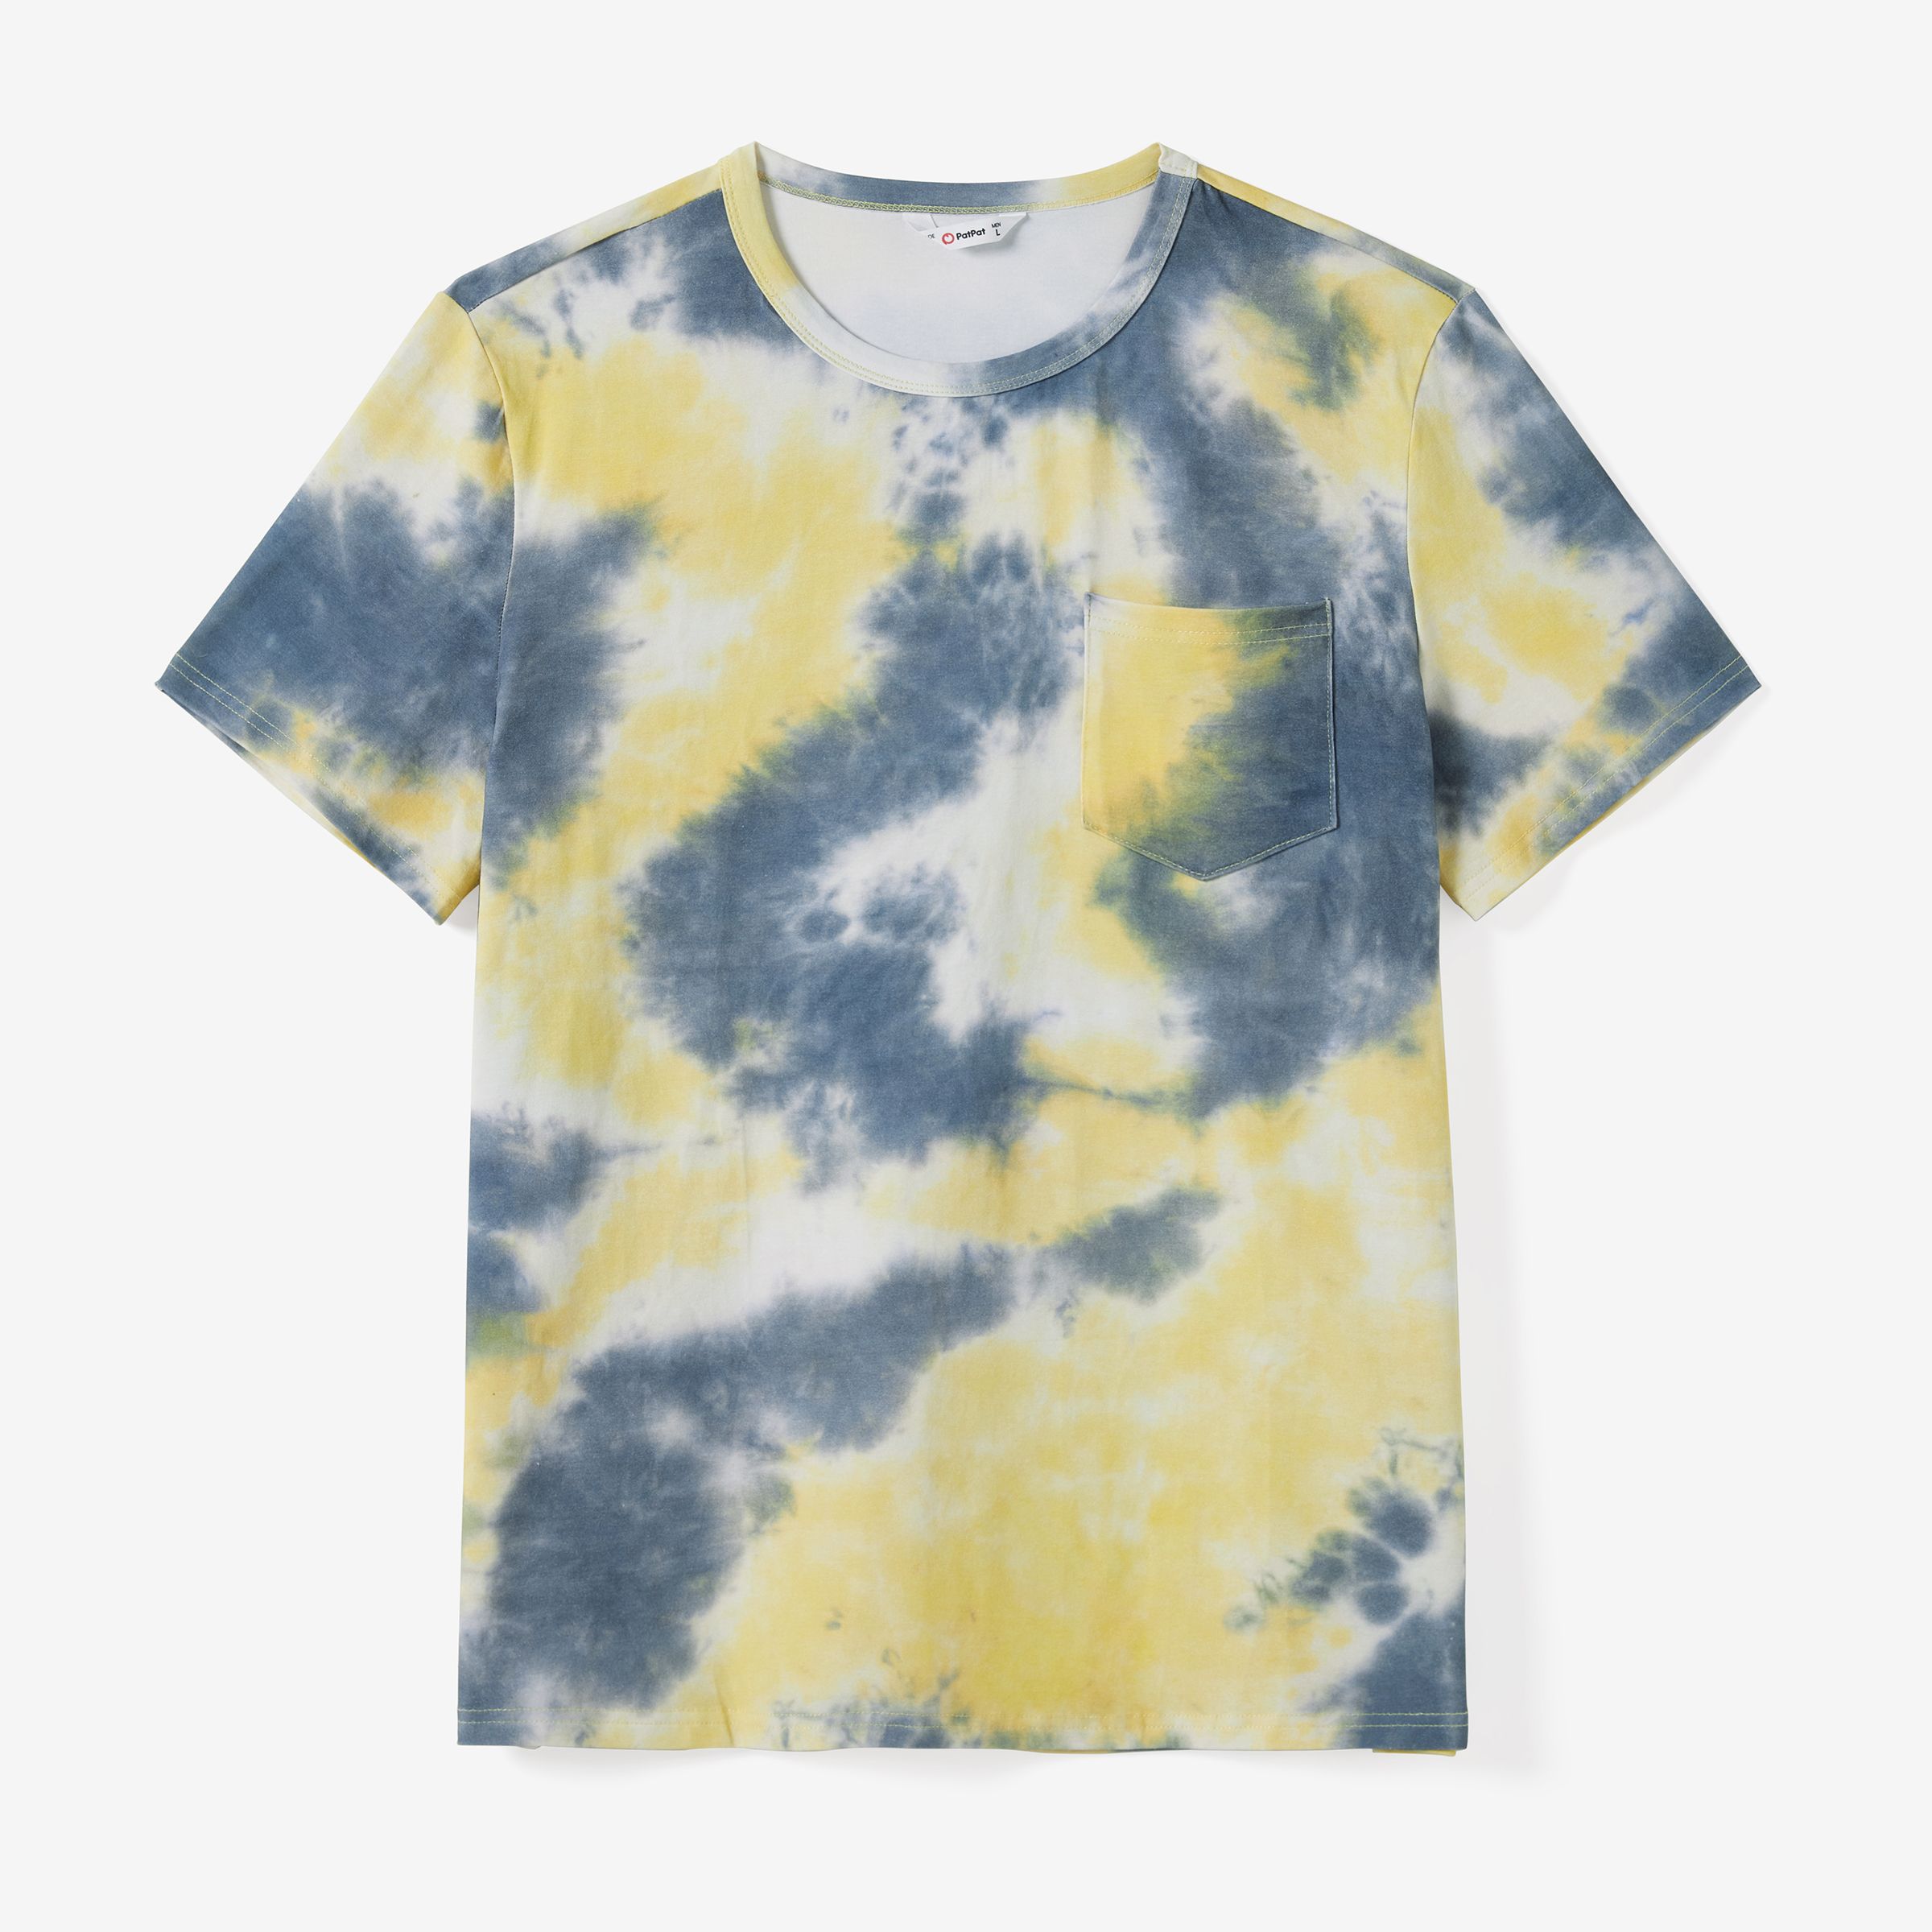 Family Matching Tie-Dye Short Sleeves Tee and Button Design A-line Midi Dress